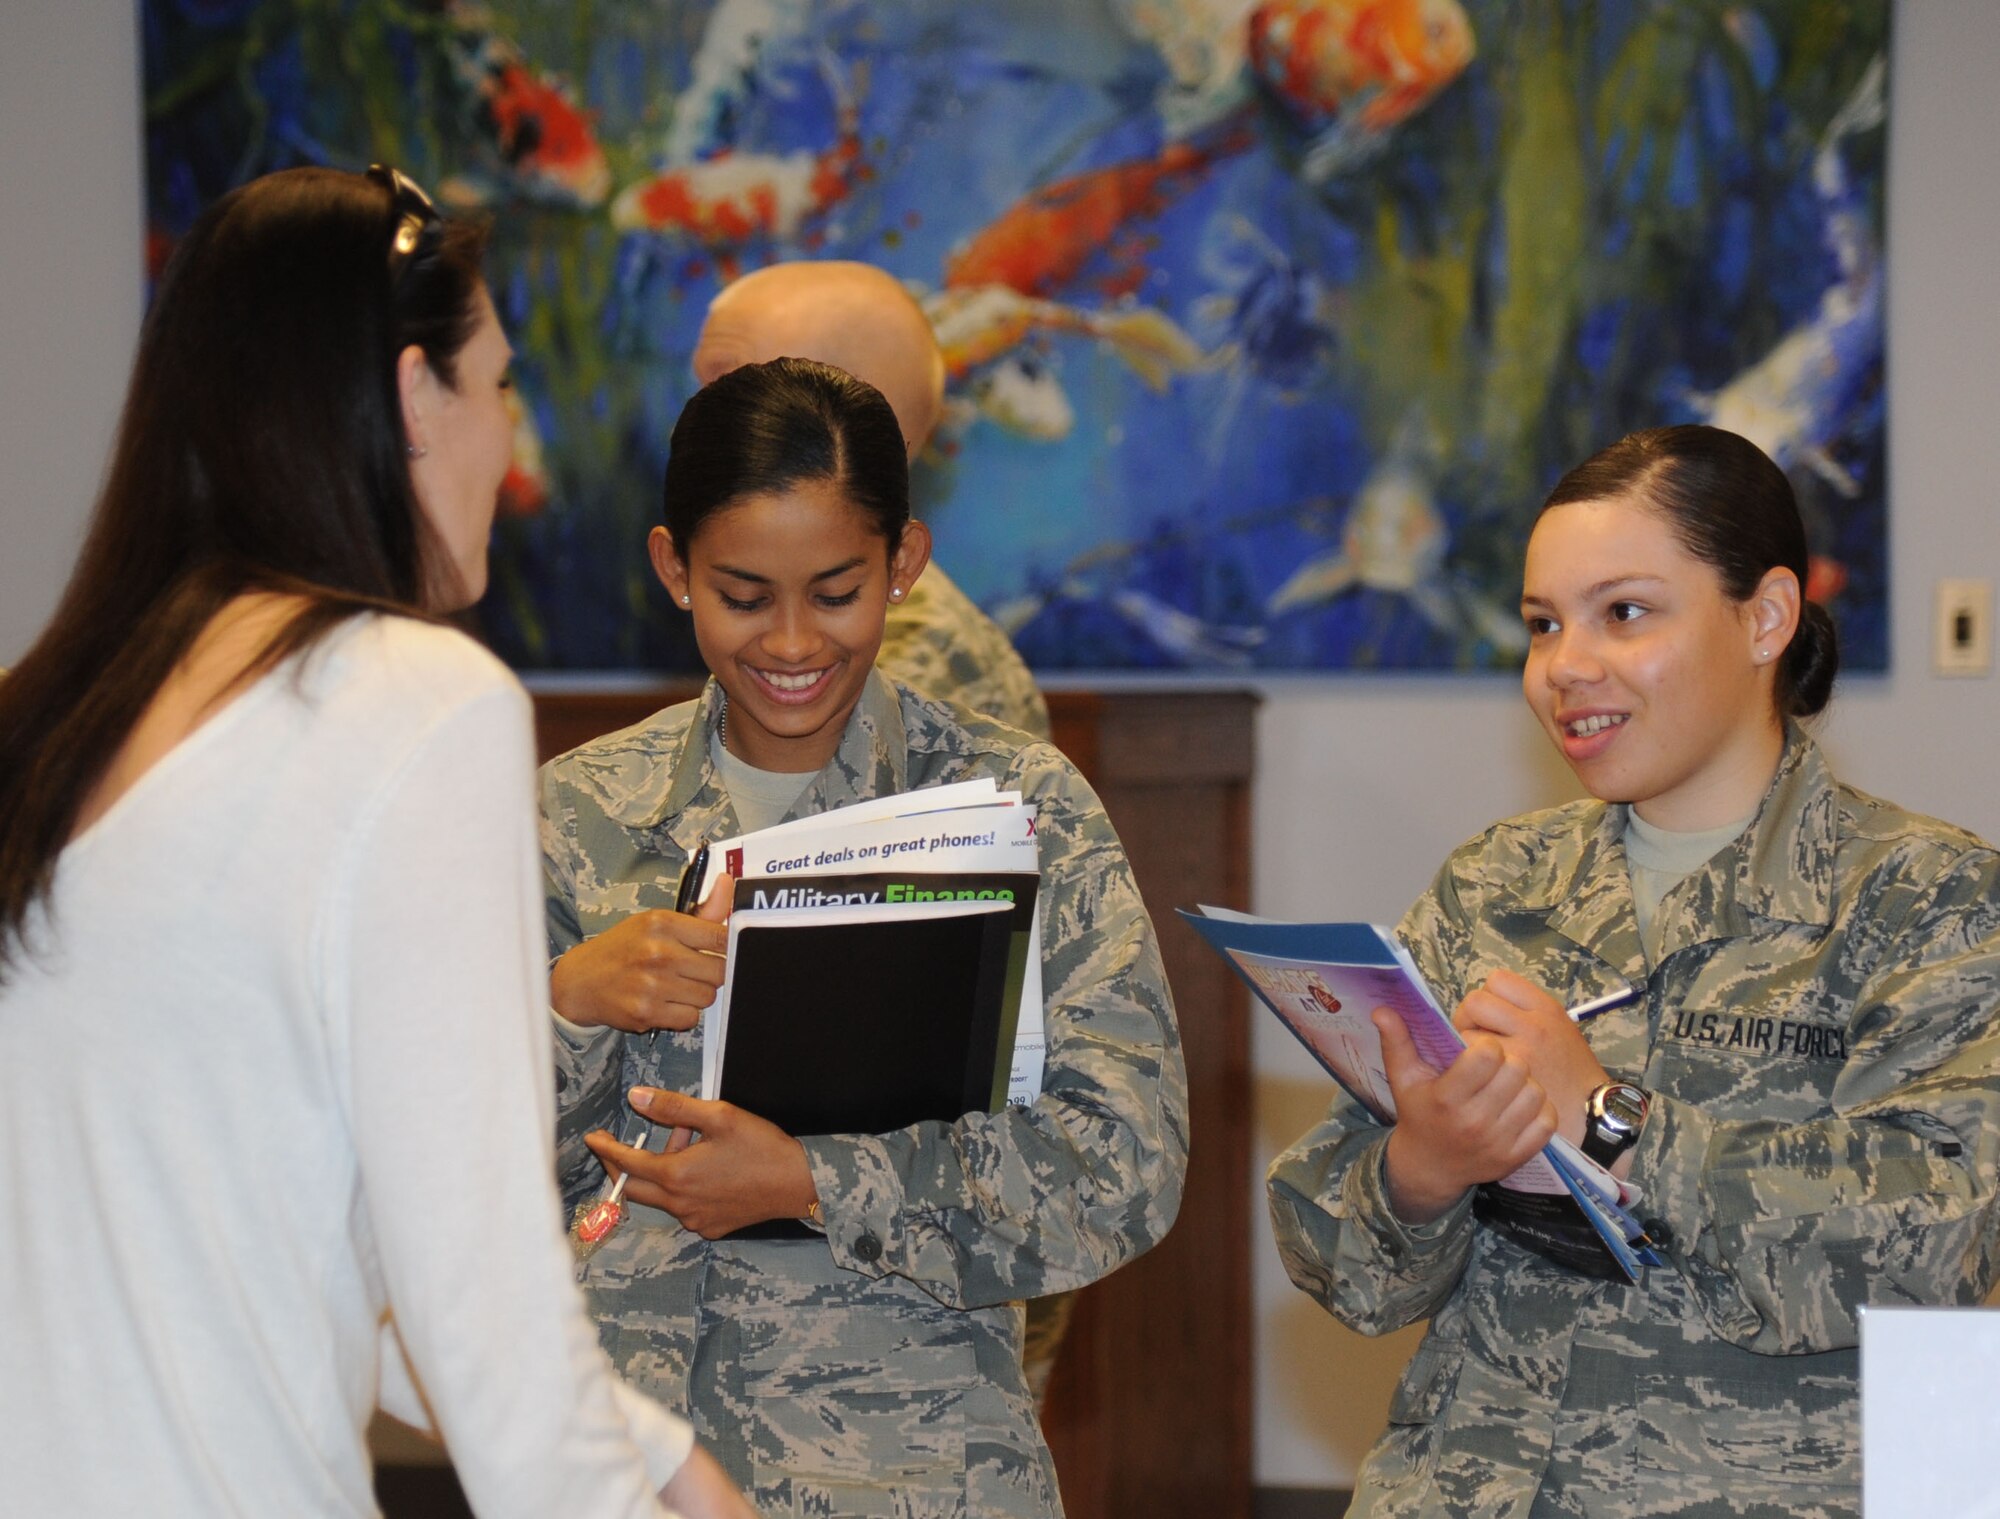 Natalie White, 81st Force Support Squadron marketing specialist, provides information about base activities to Airmen Basic Andrea Raudales and Amanda Marrero, 335th Training Squadron, during the “Right Start” program Feb. 14, 2014, at the Levitow Training Support Facility, Keesler Air Force Base, Miss.  The “Right Start” program, which replaced seven hours of power point briefings, is an interactive program that allows the Airmen to get direct information from base support and morale agencies. (U.S. Air Force photo by Kemberly Groue)